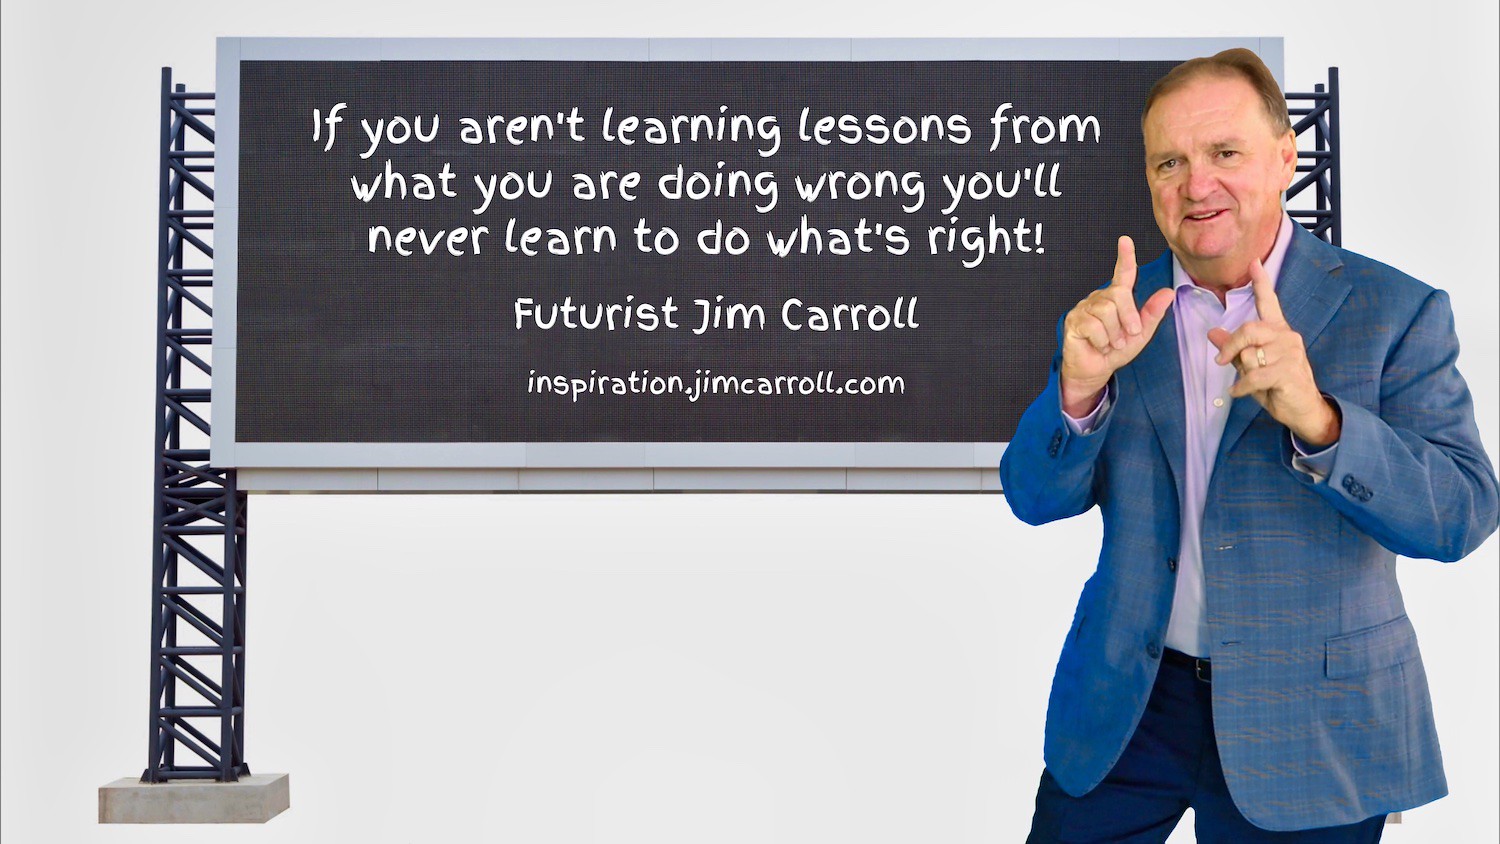 "If you aren't learning lessons from what you are doing wrong you'll never learn to do what's right!" - Futurist Jim Carroll